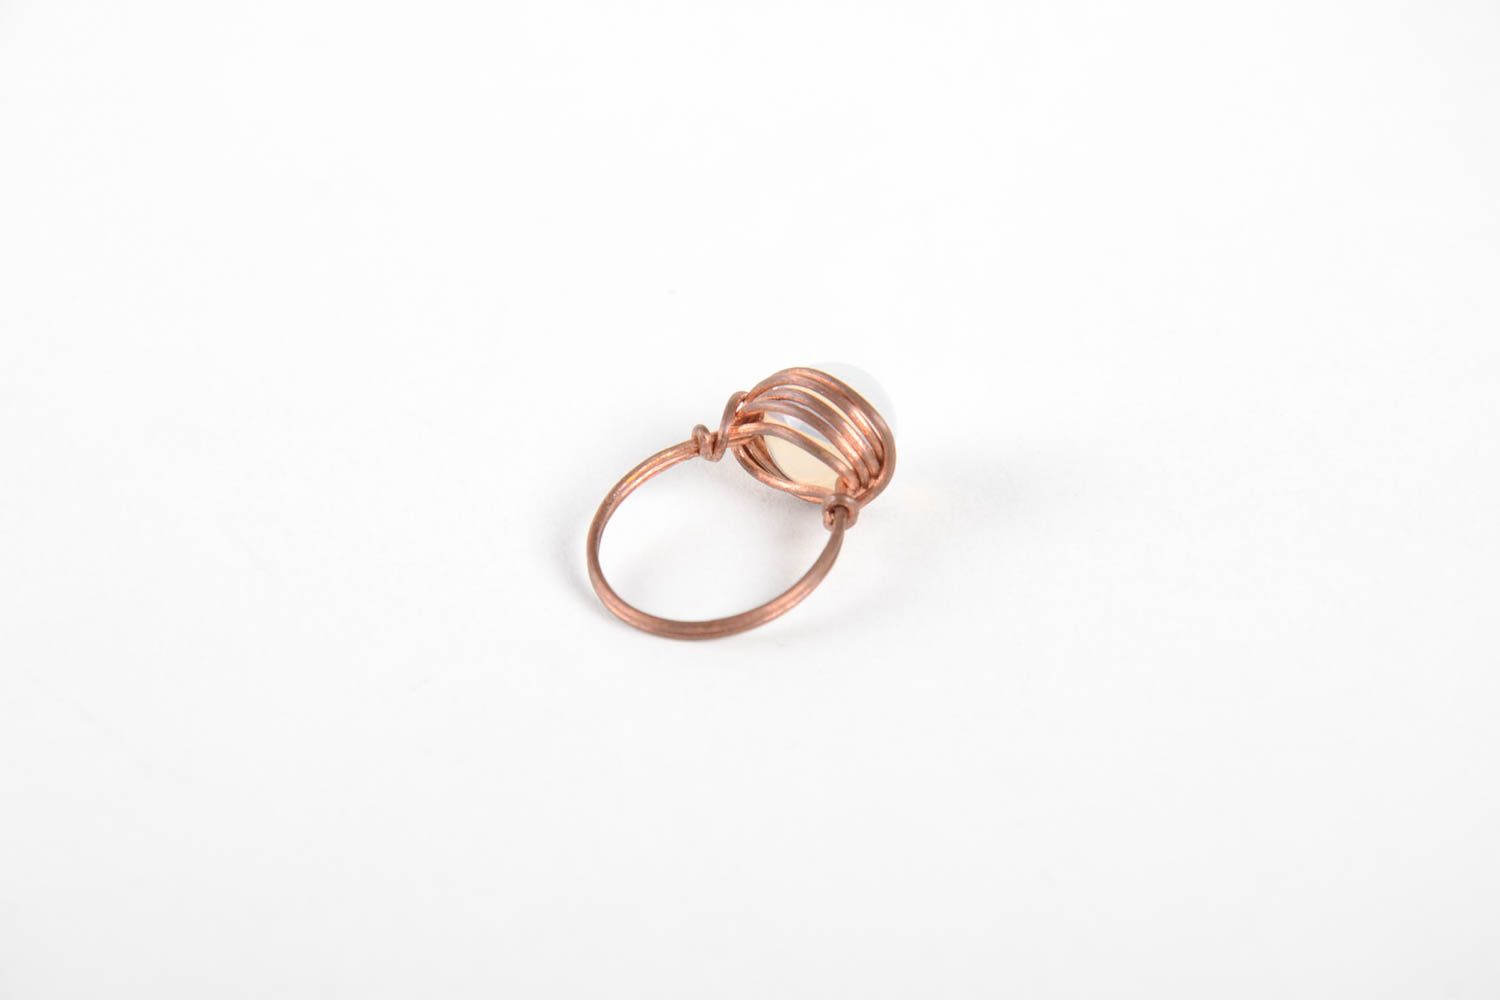 Handmade copper wire ring ring with natural stones handmade copper jewelry photo 4